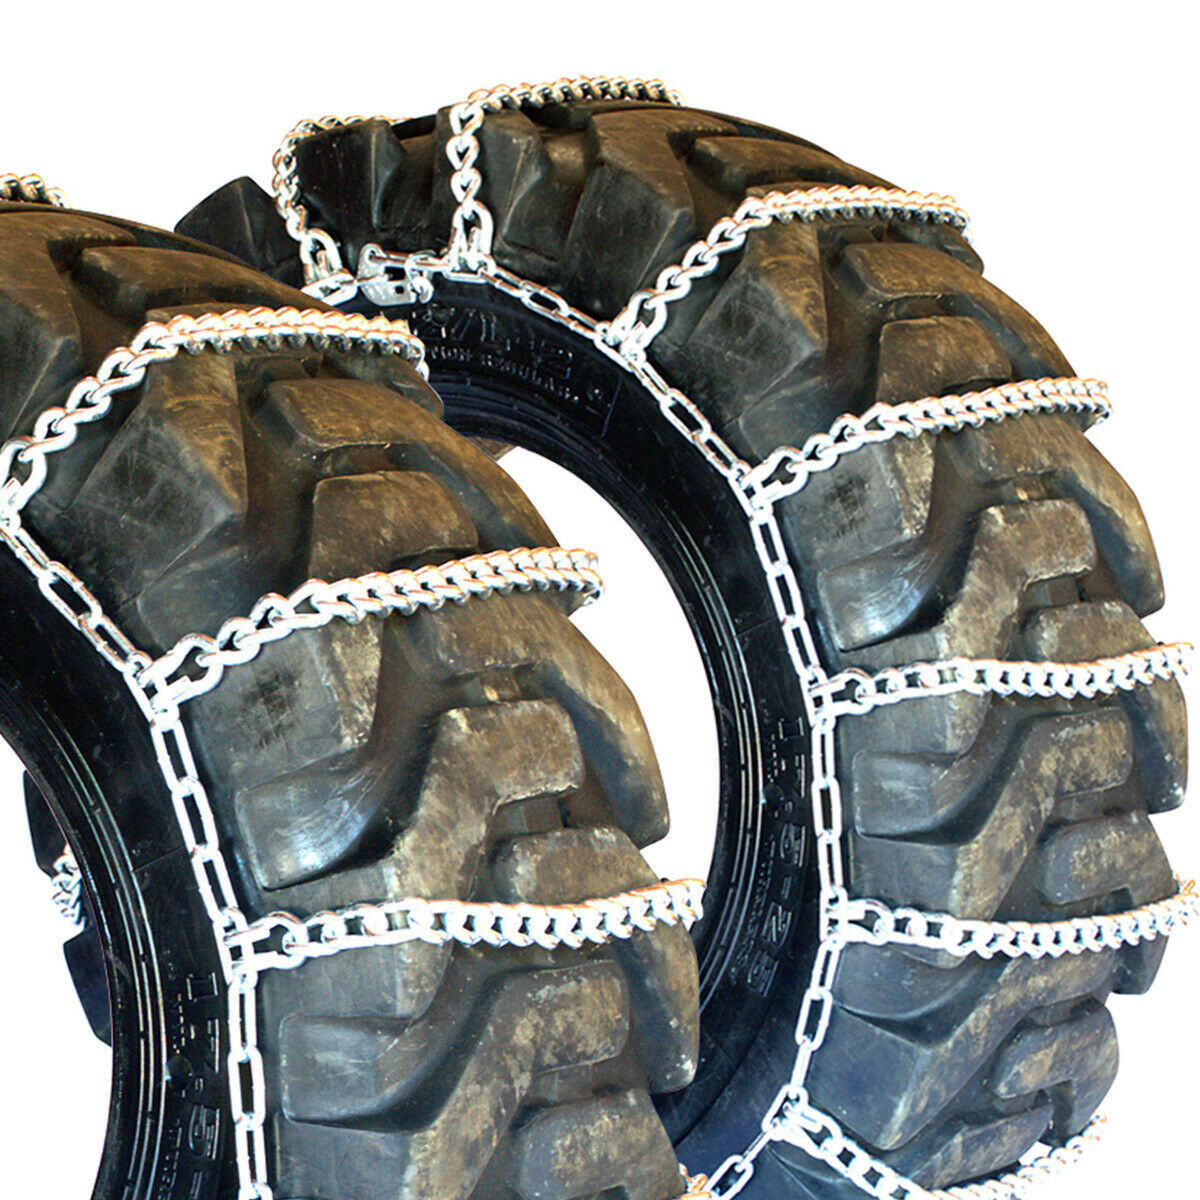 Titan Tractor Link Tire Chains Snow Ice Mud 10mm 12.4-38